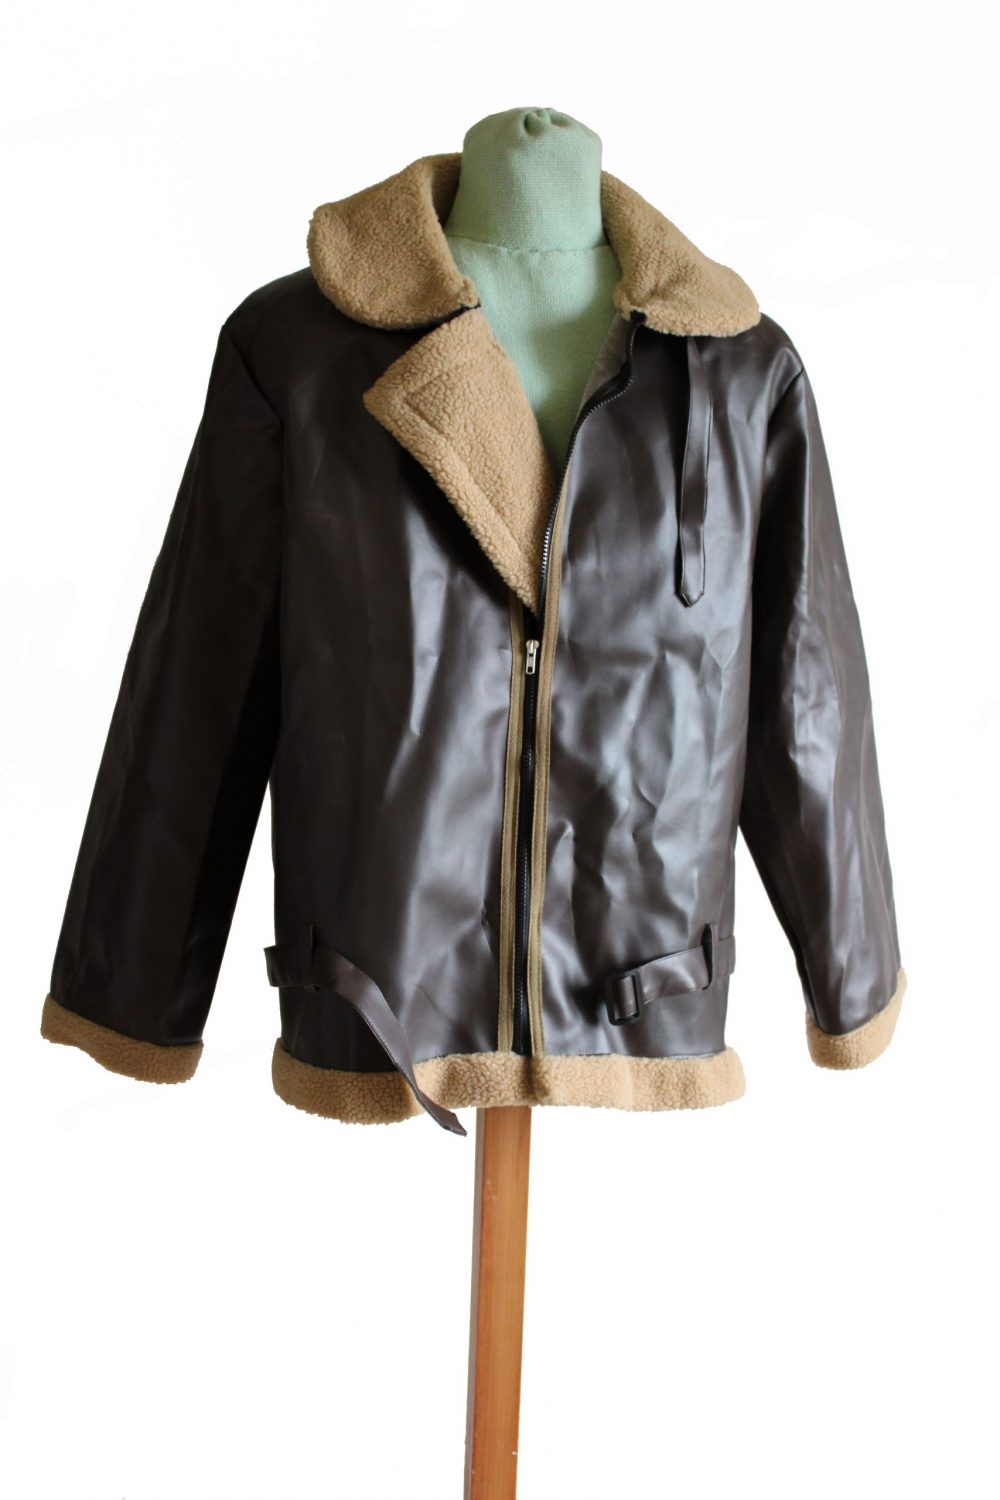 Brown leather aviator jacket with light brown sheepskin cuffs and collar